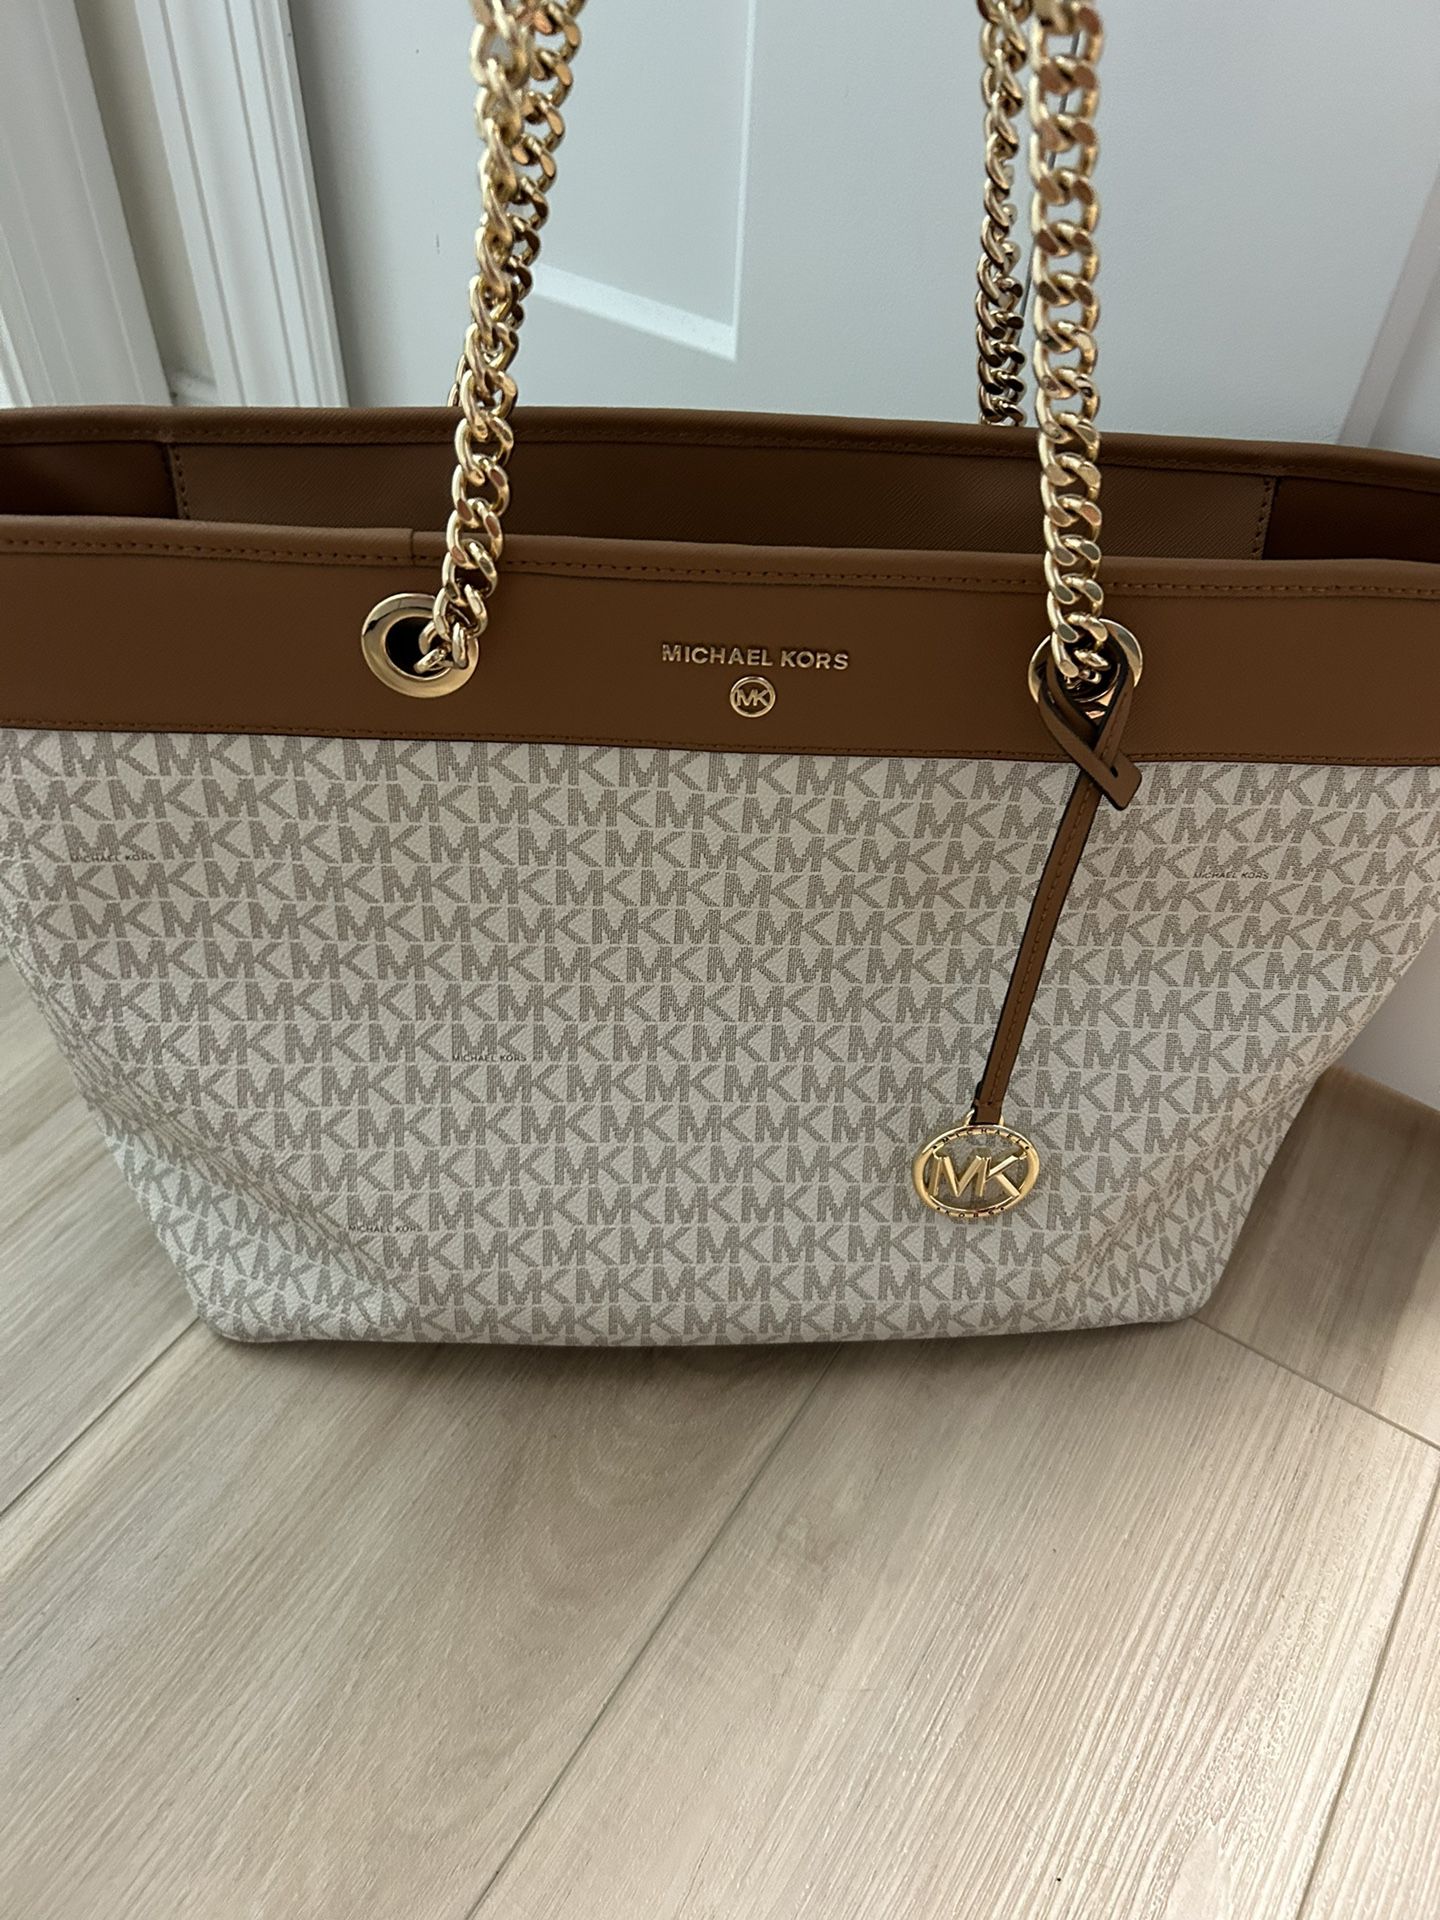 Michael Kors Large Tote bag Exc Condition 